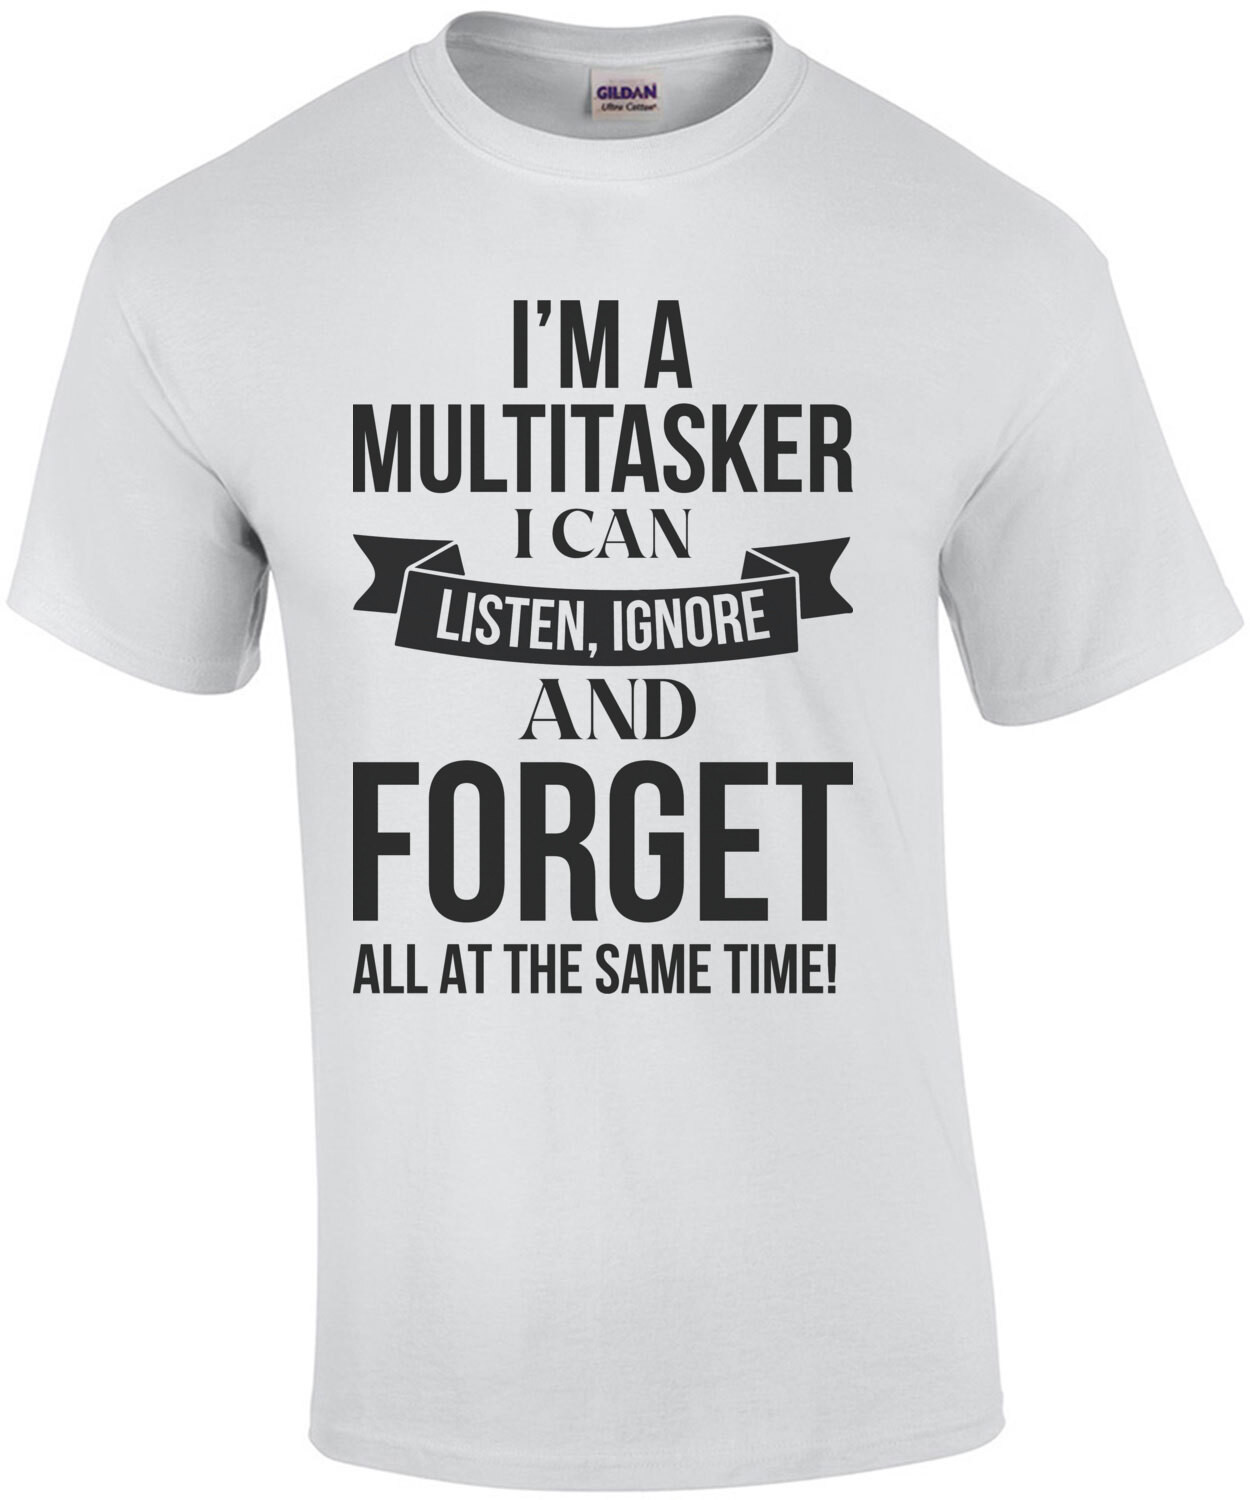 I'm a multitasker. I can listen, ignore and forget all at the same time. Sarcasm T-Shirt